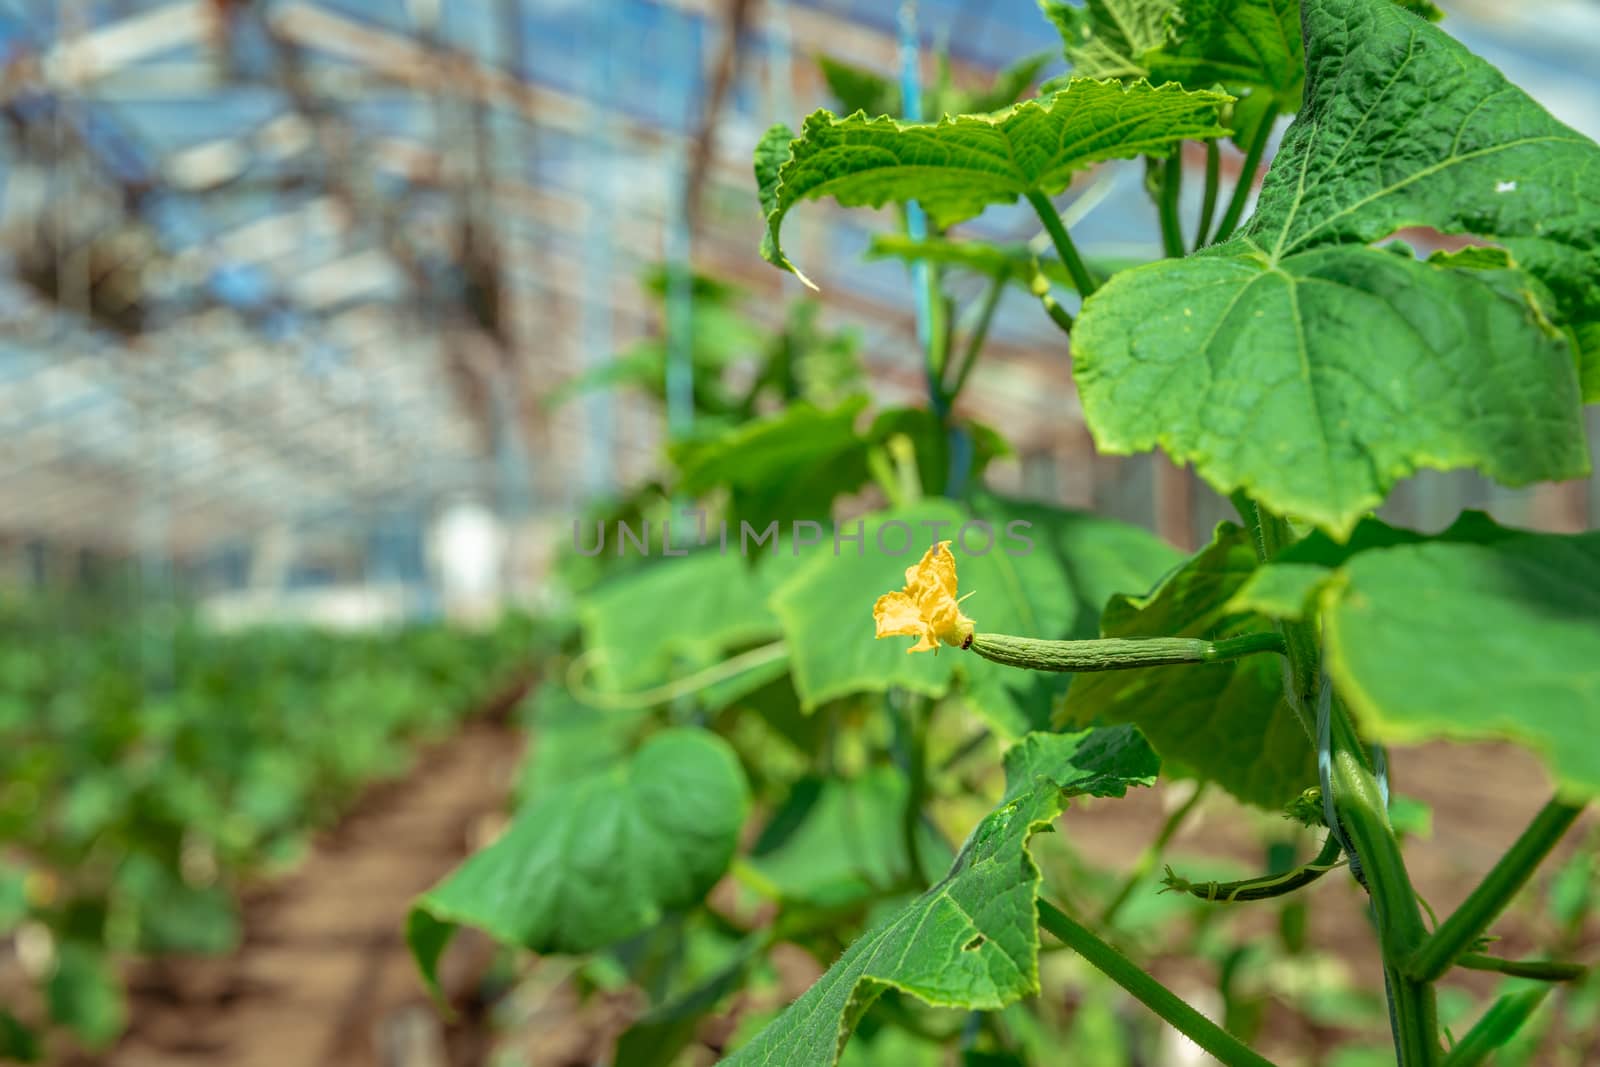 growing organic cucumbers without chemicals and pesticides in a greenhouse on the farm, healthy vegetables with vitamins by Edophoto